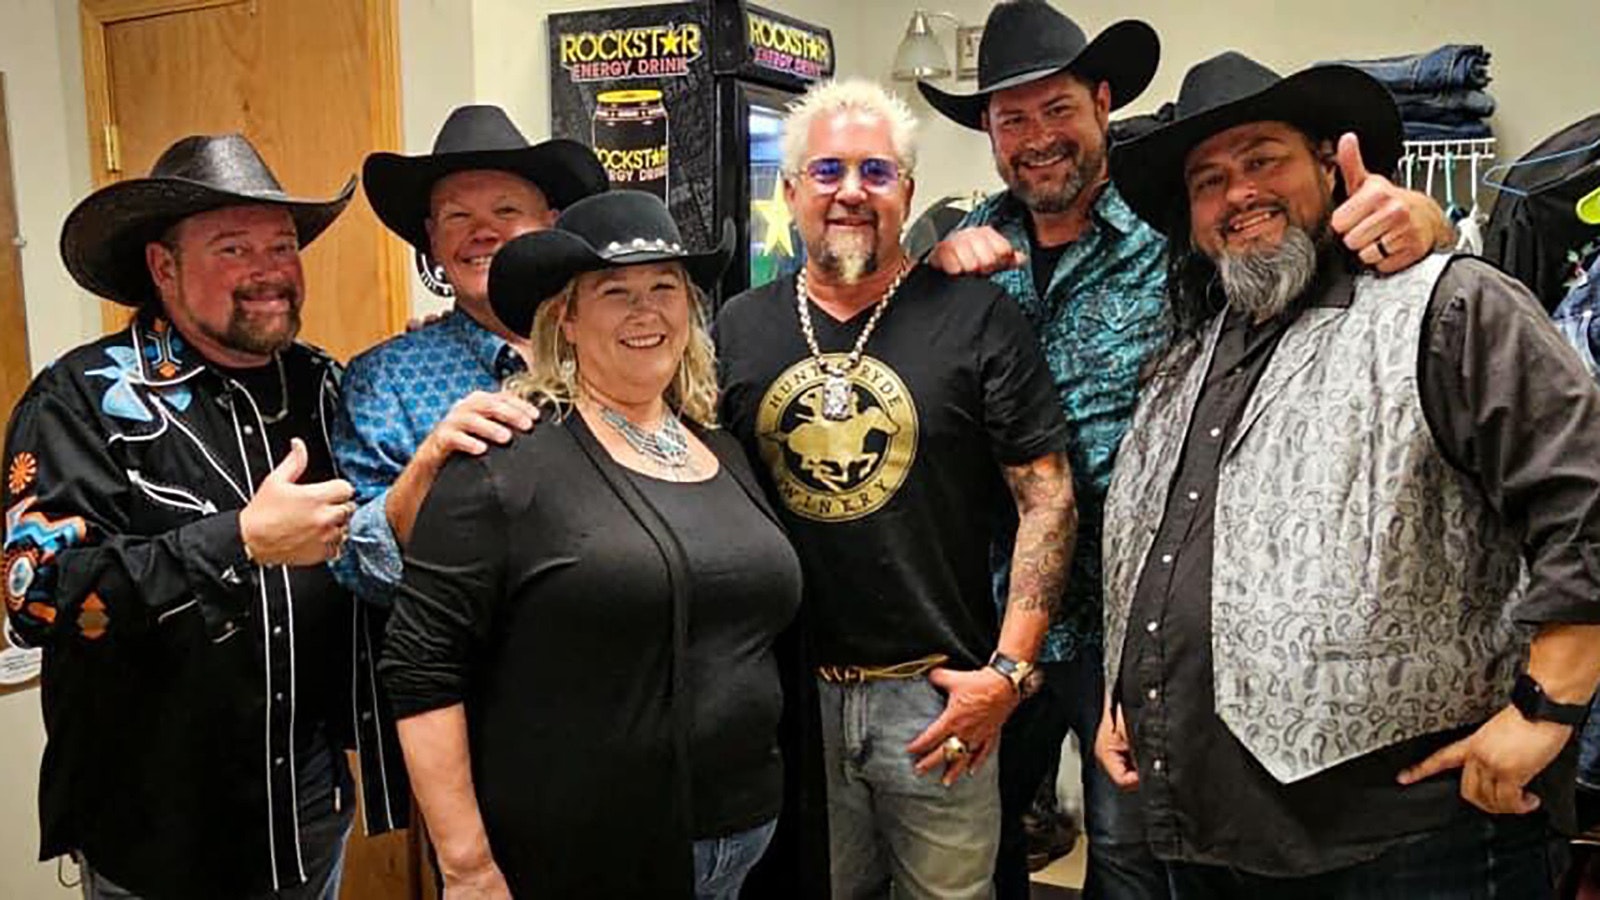 Guy Fieri with band Triple C Cowboys, from left, Marvin Short, Greg Pendley, Ann Pendley, Fieri, Ryan Martin and Johnny Sanchez.